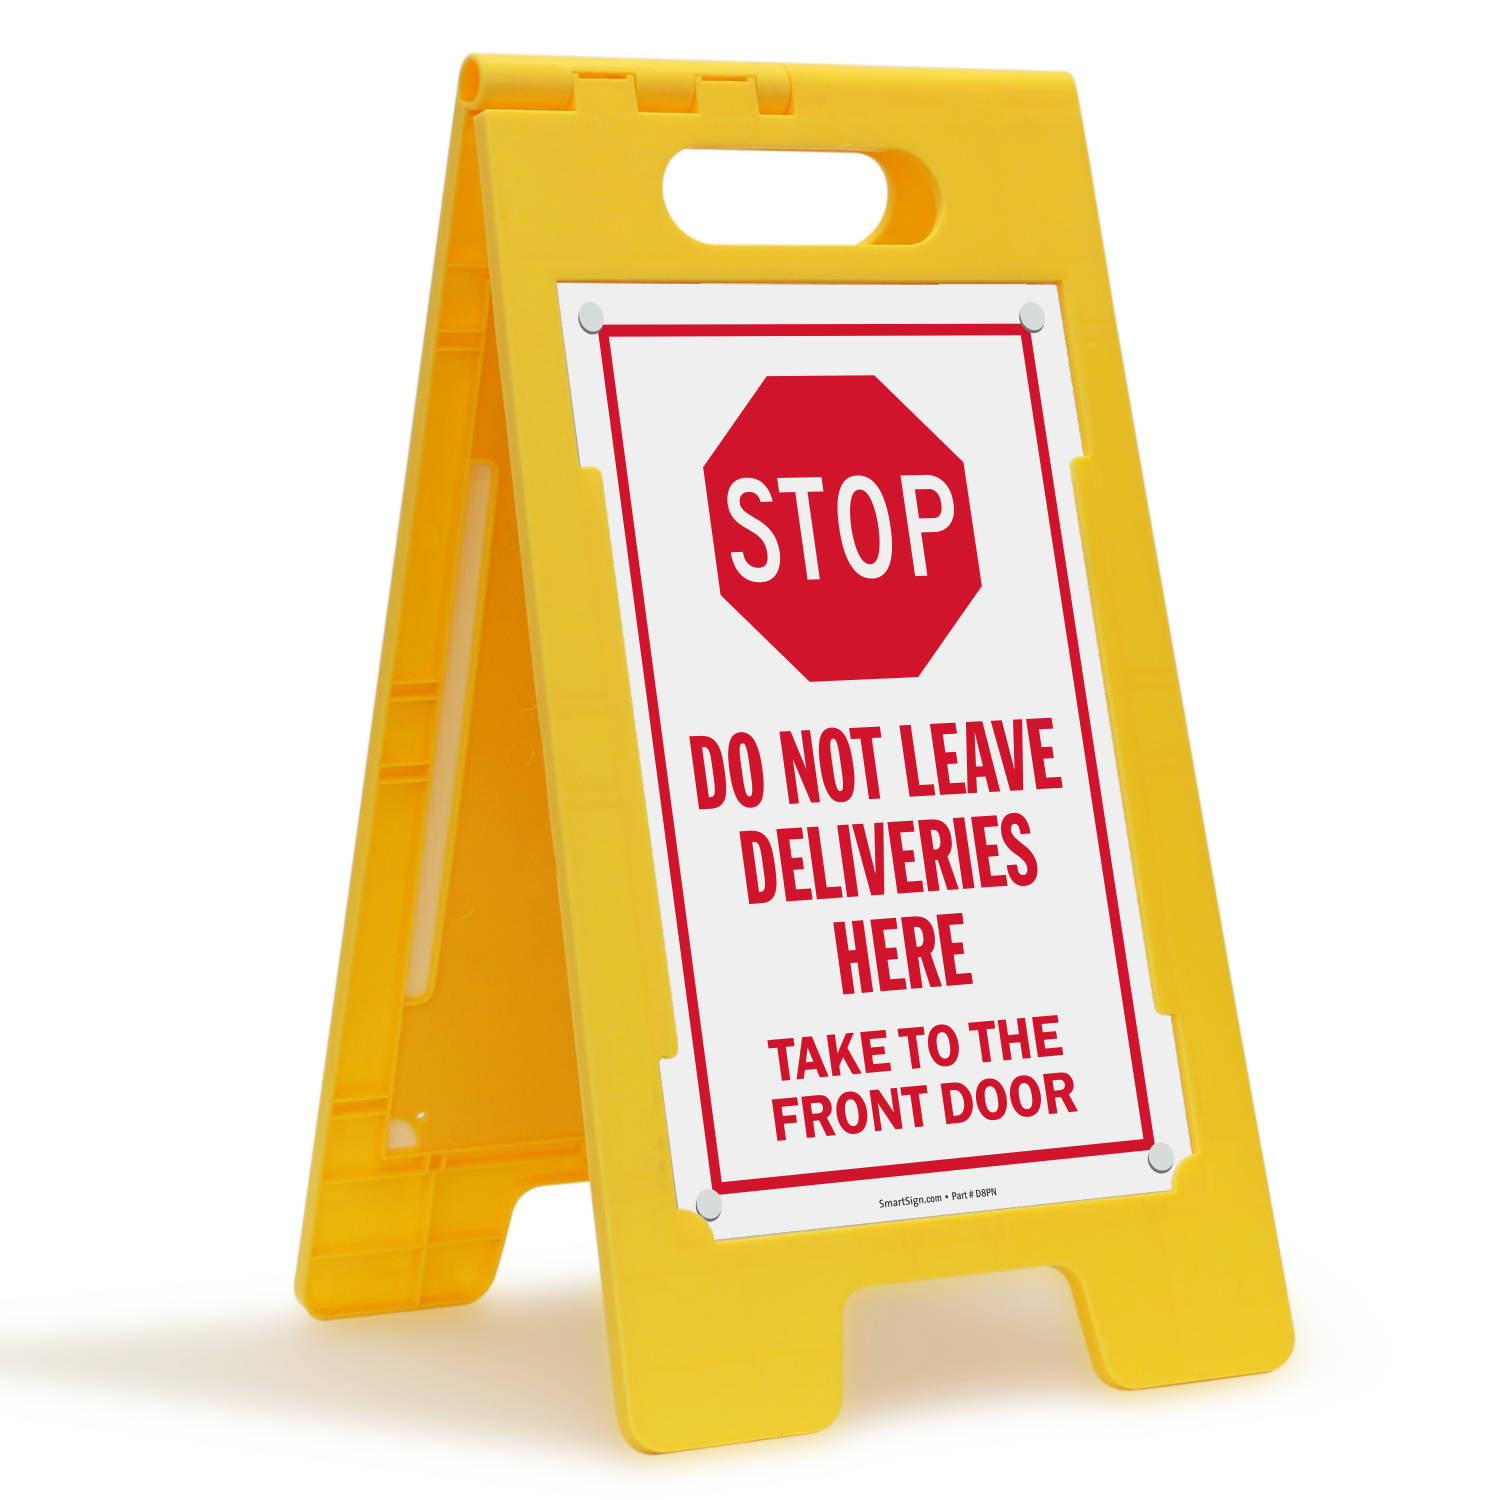 STOP DO NOT LEAVE PACKAGES OUTSIDE OF THIS DOOR Metal Aluminum composite sign